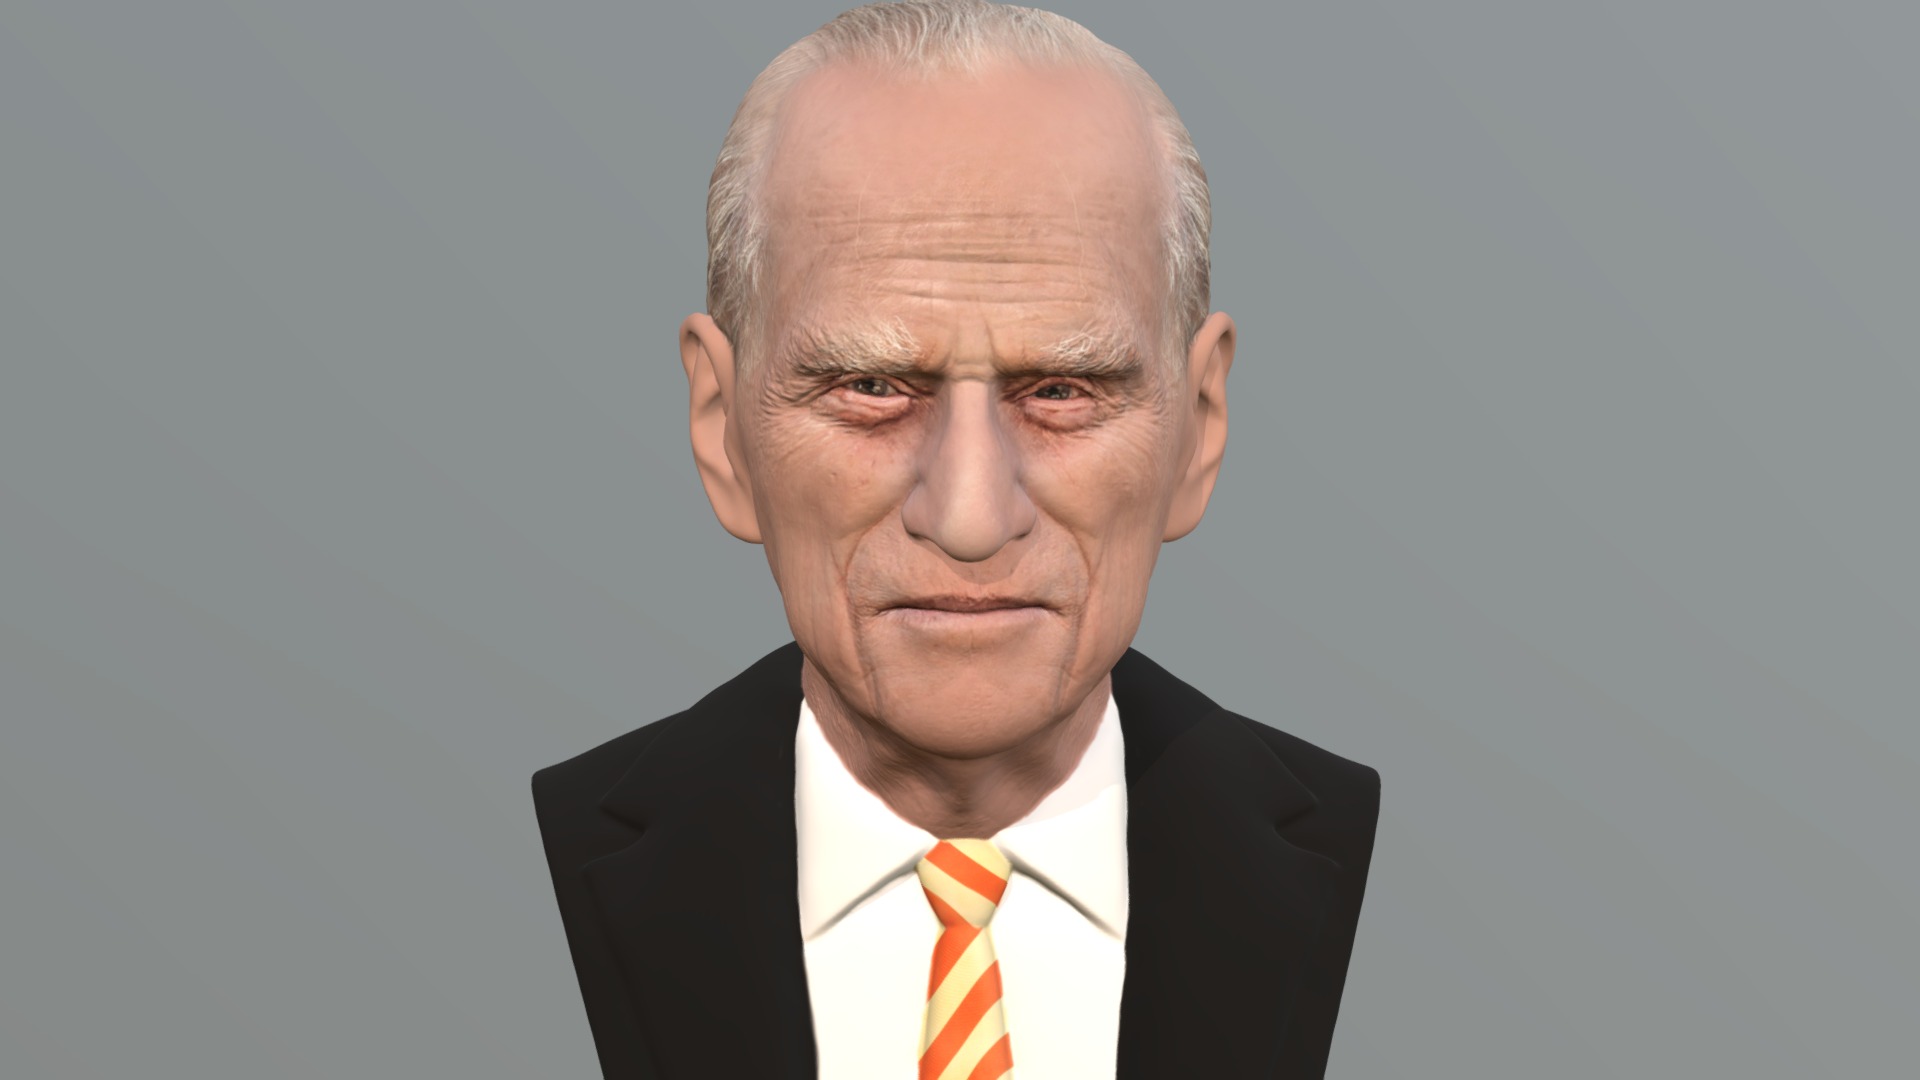 3D model Prince Philip bust for full color 3D printing - This is a 3D model of the Prince Philip bust for full color 3D printing. The 3D model is about a man in a suit.